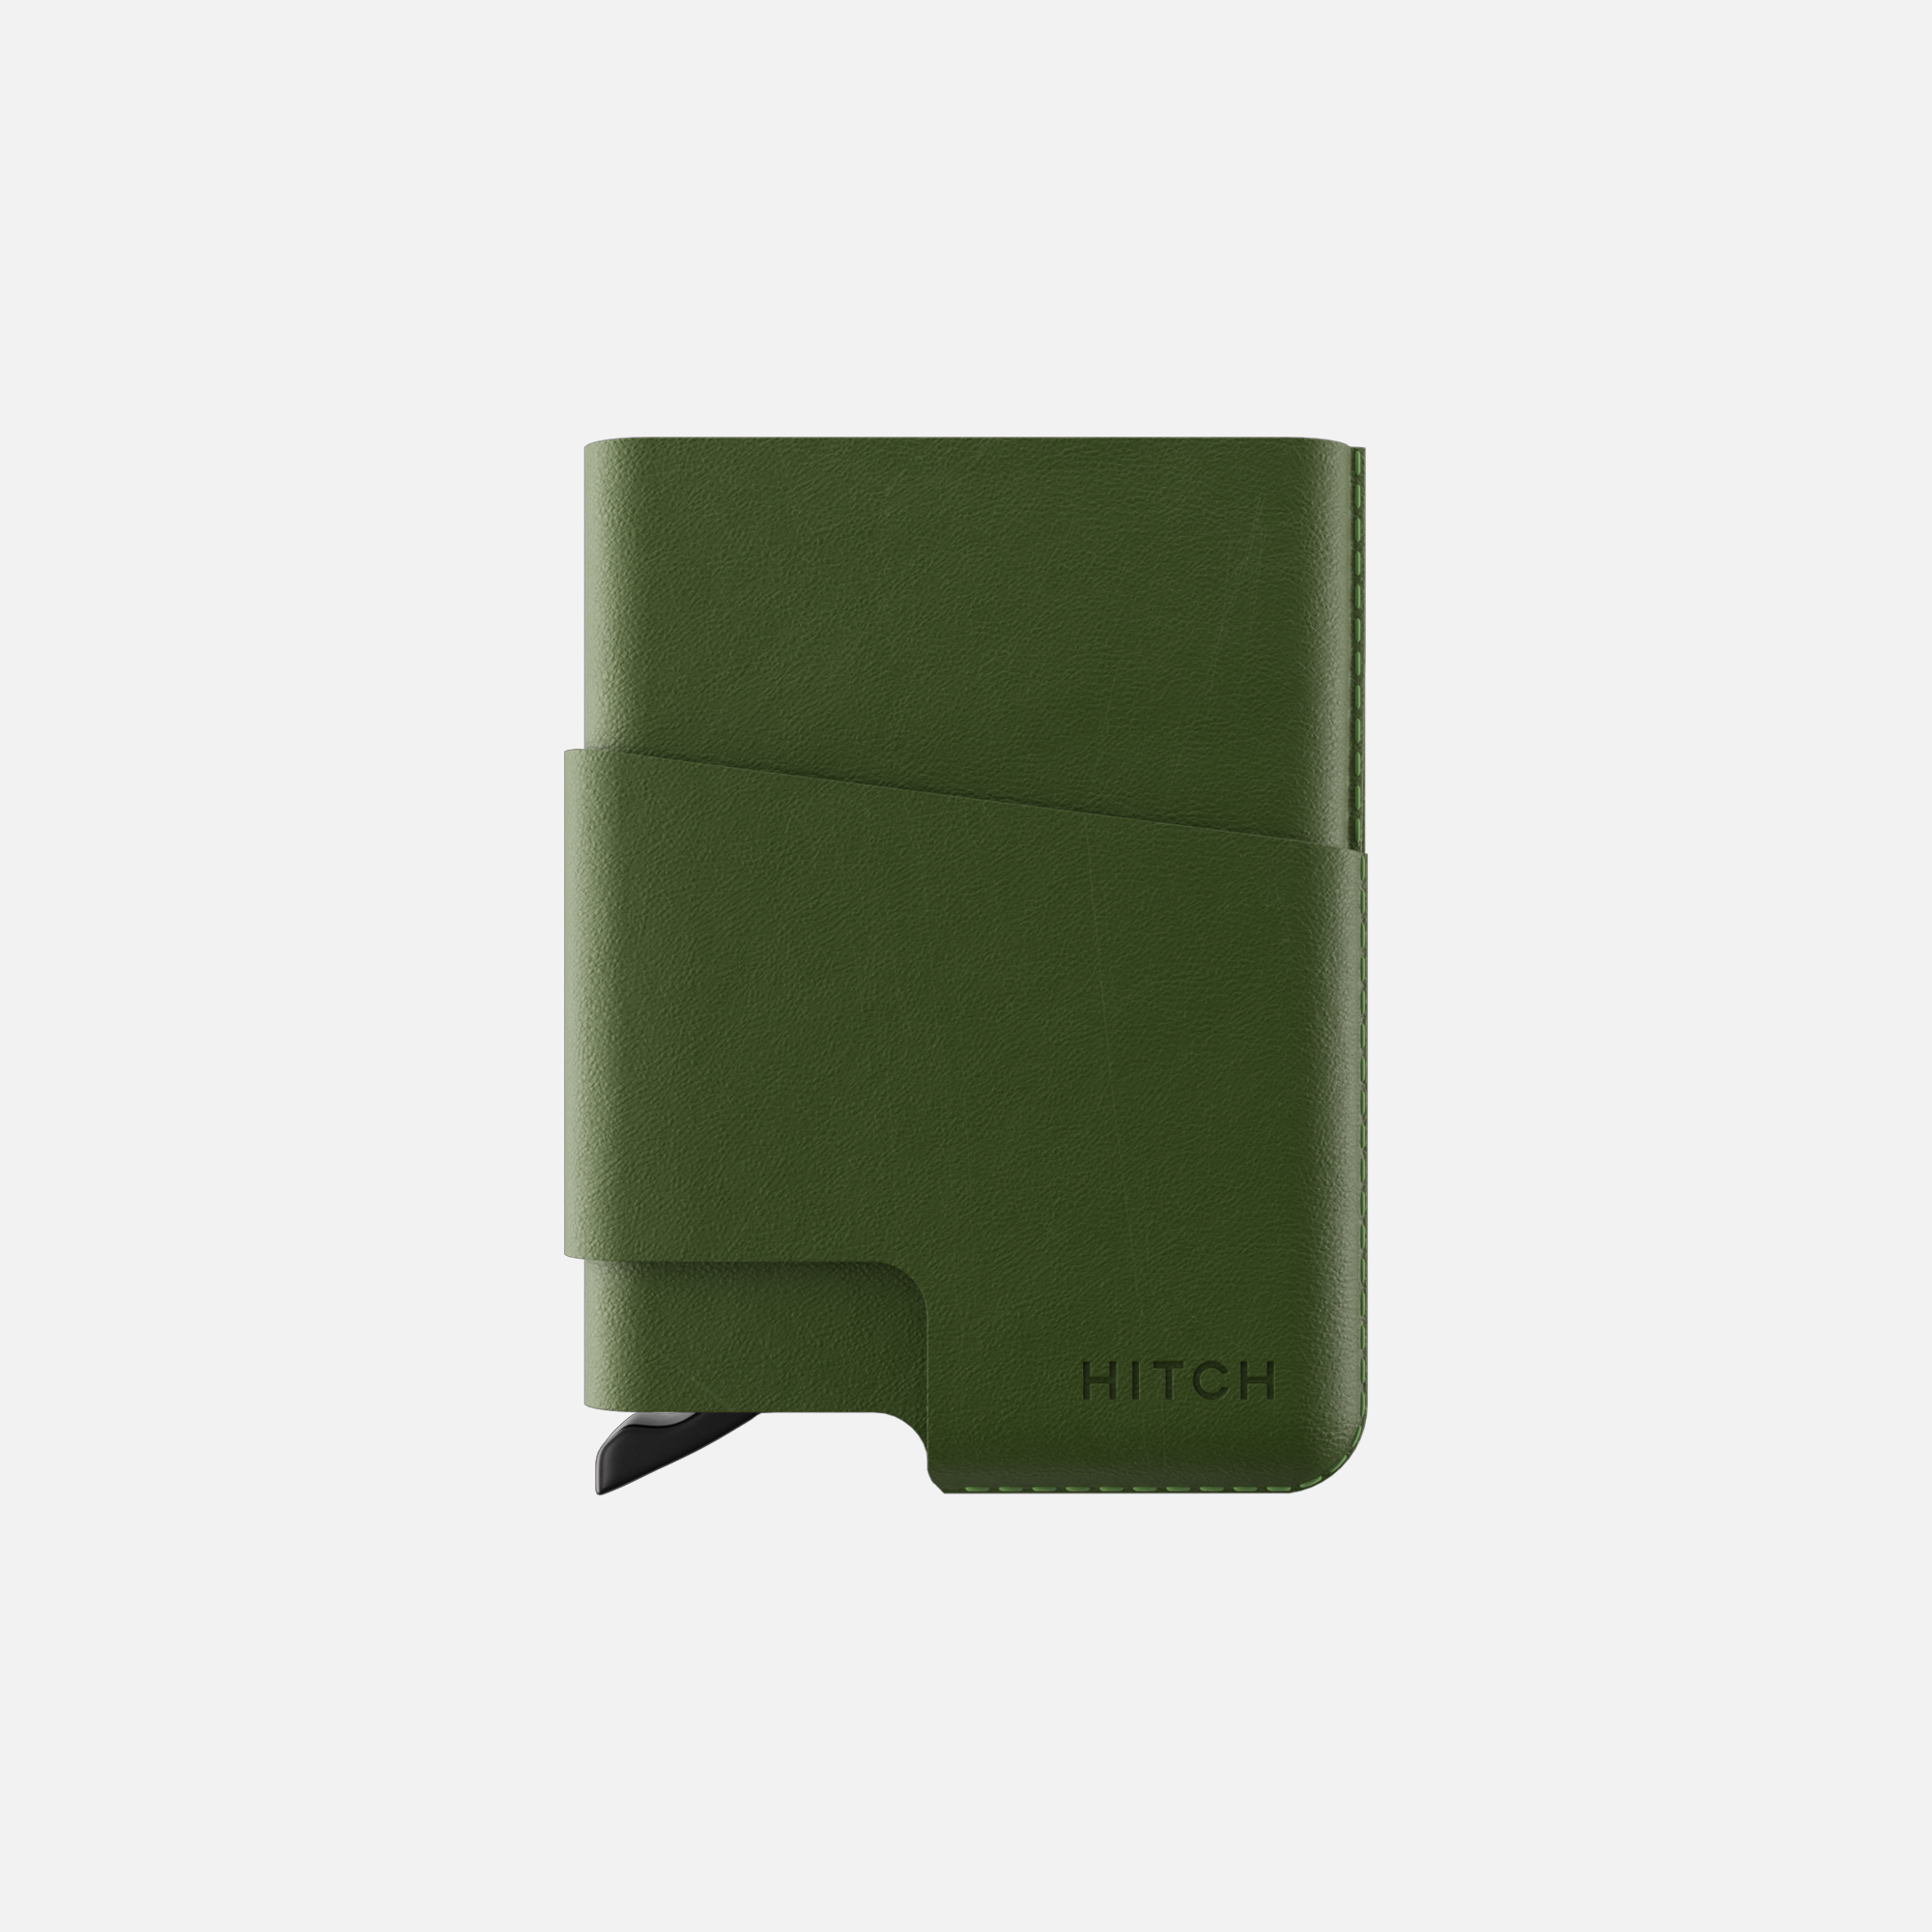 Green leather cardholder wallet with elastic closure on a white background.